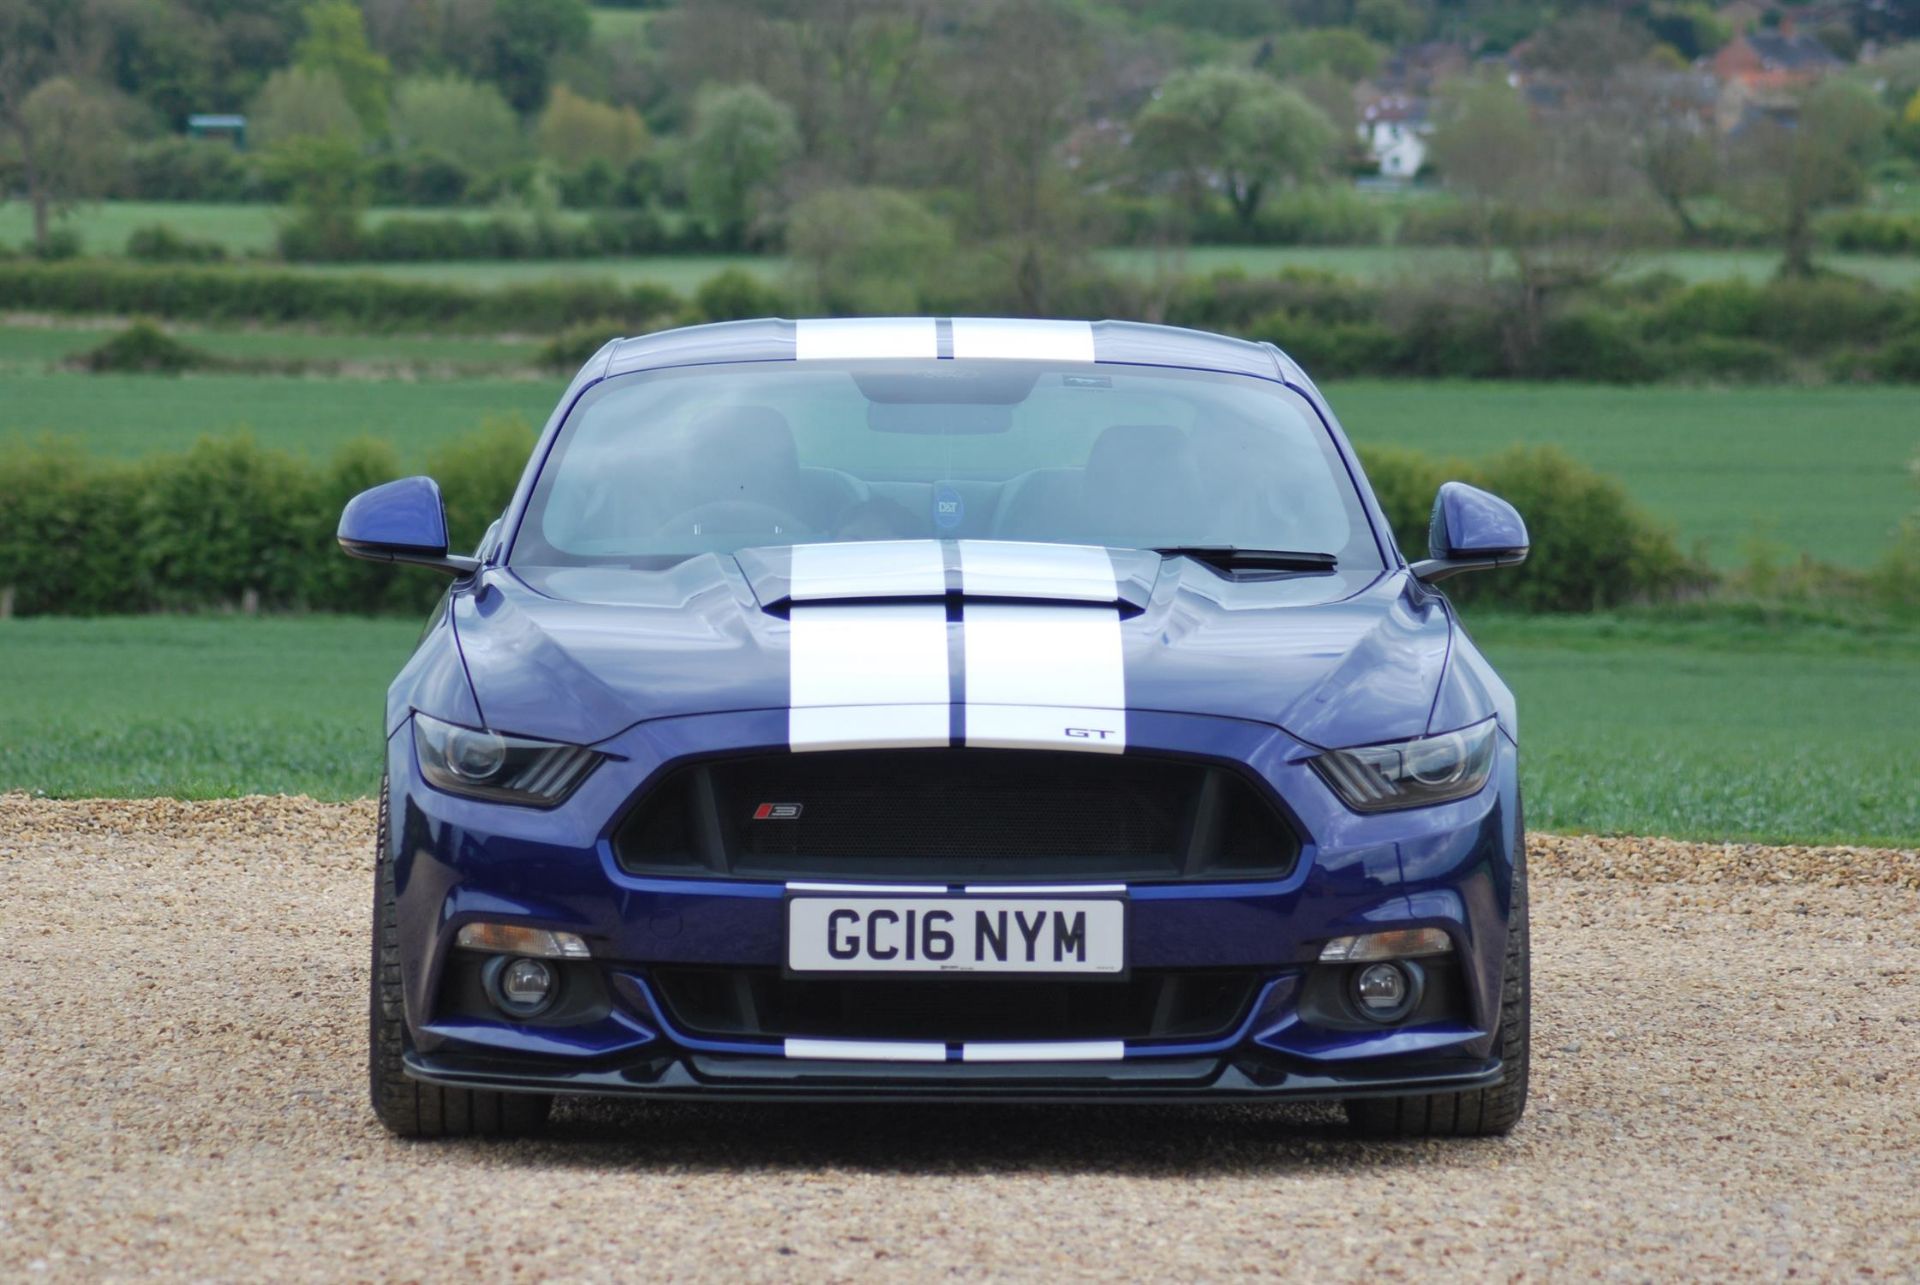 2016 Ford Mustang 5.0-Litre V8 GT S550 Roush Supercharged - Image 6 of 10